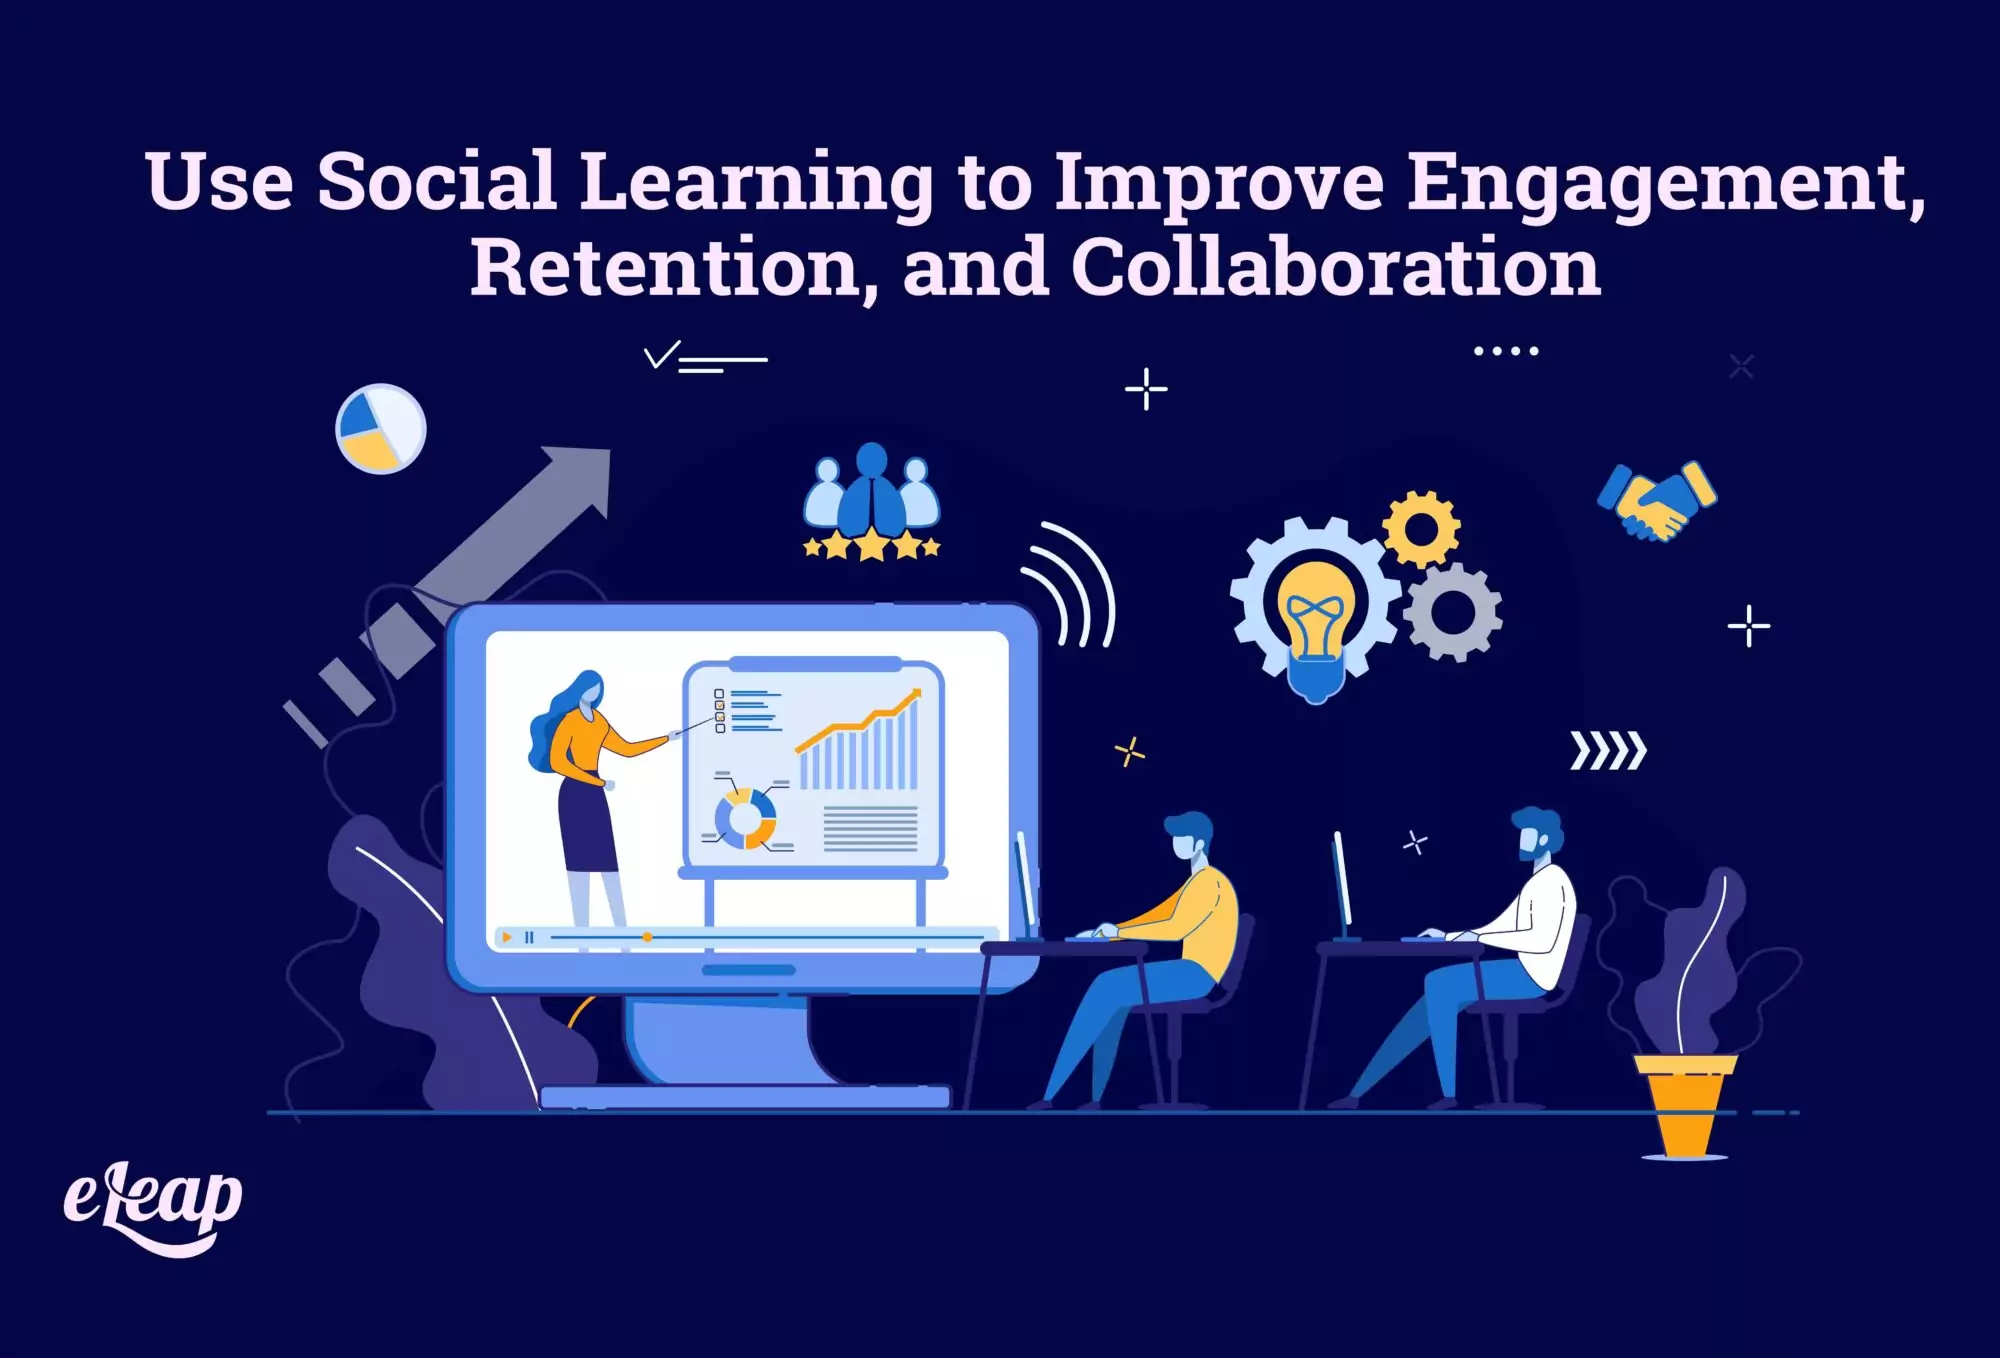 Use Social Learning to Improve Engagement, Retention, and Collaboration